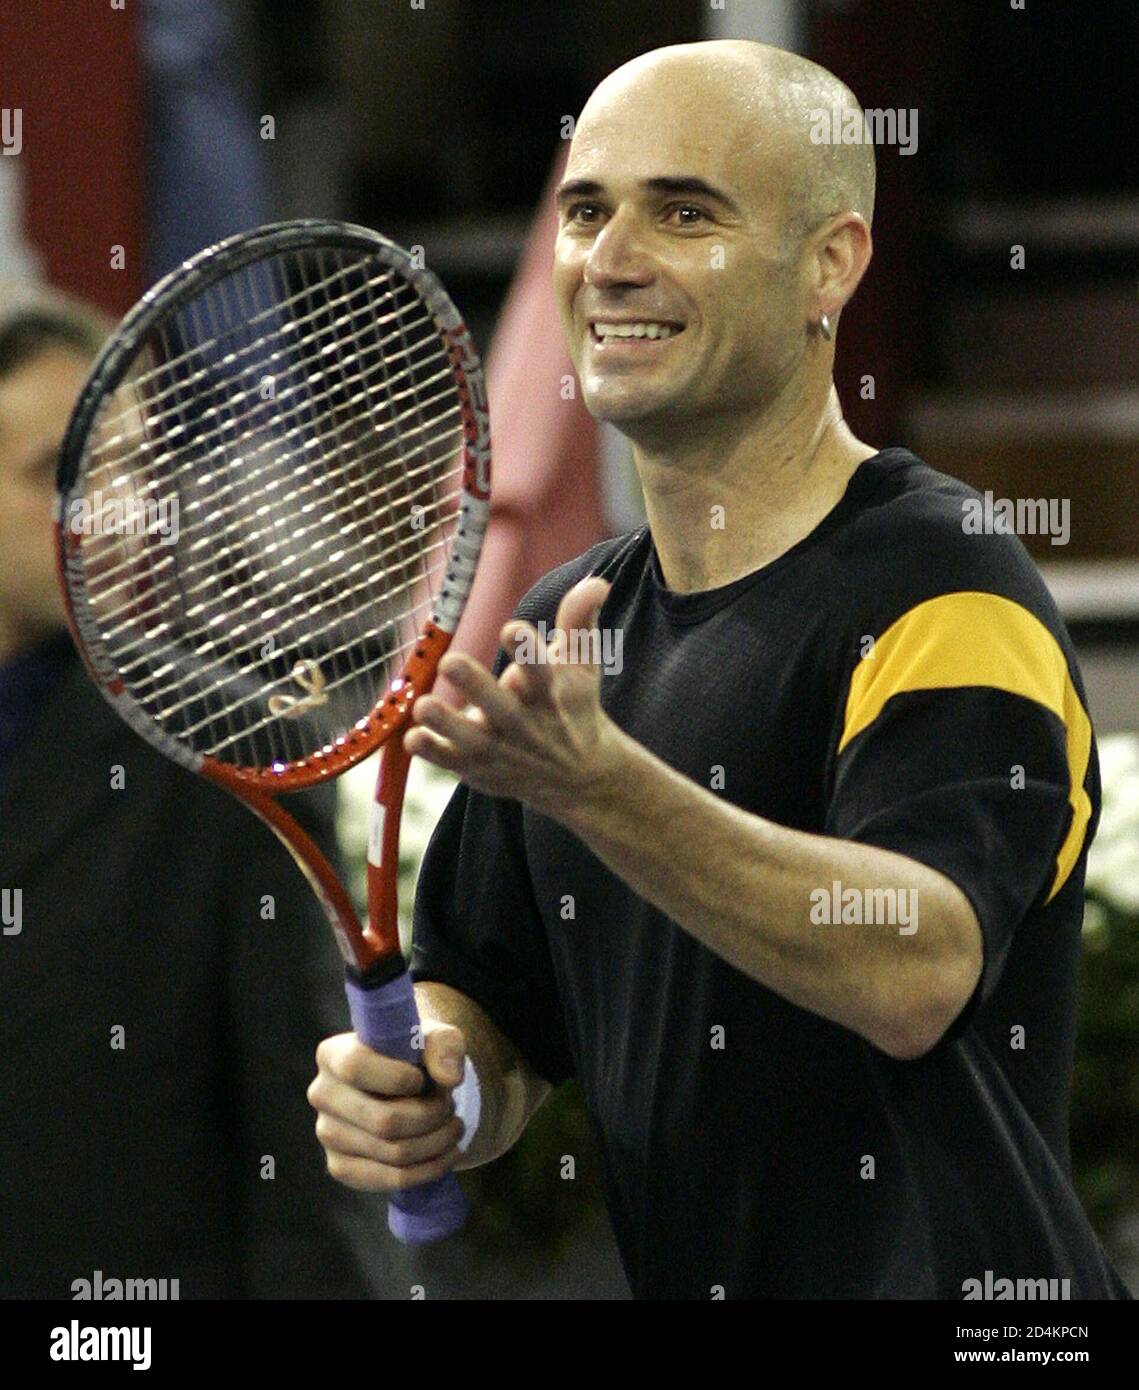 Andre Agassi of the U.S. celebrates his victory over Tommy Robredo of Spain  after their quarter-final match at the Madrid Masters tennis tournament in  Madrid, October 22, 2004. Agassi won 6-7 6-3